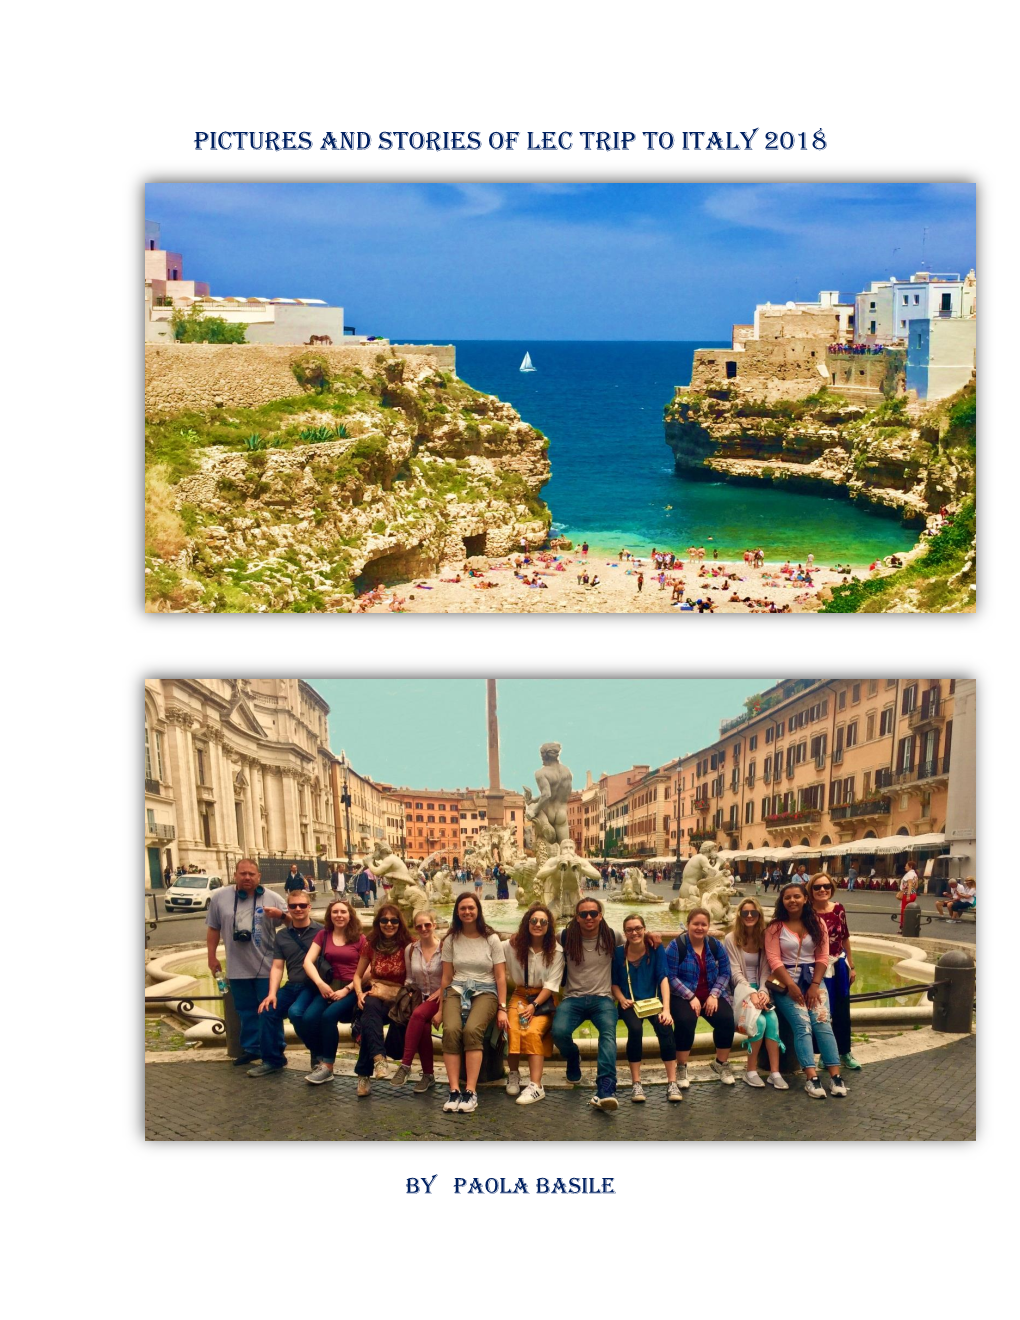 Pictures and Stories of LEC Trip to Italy 2018